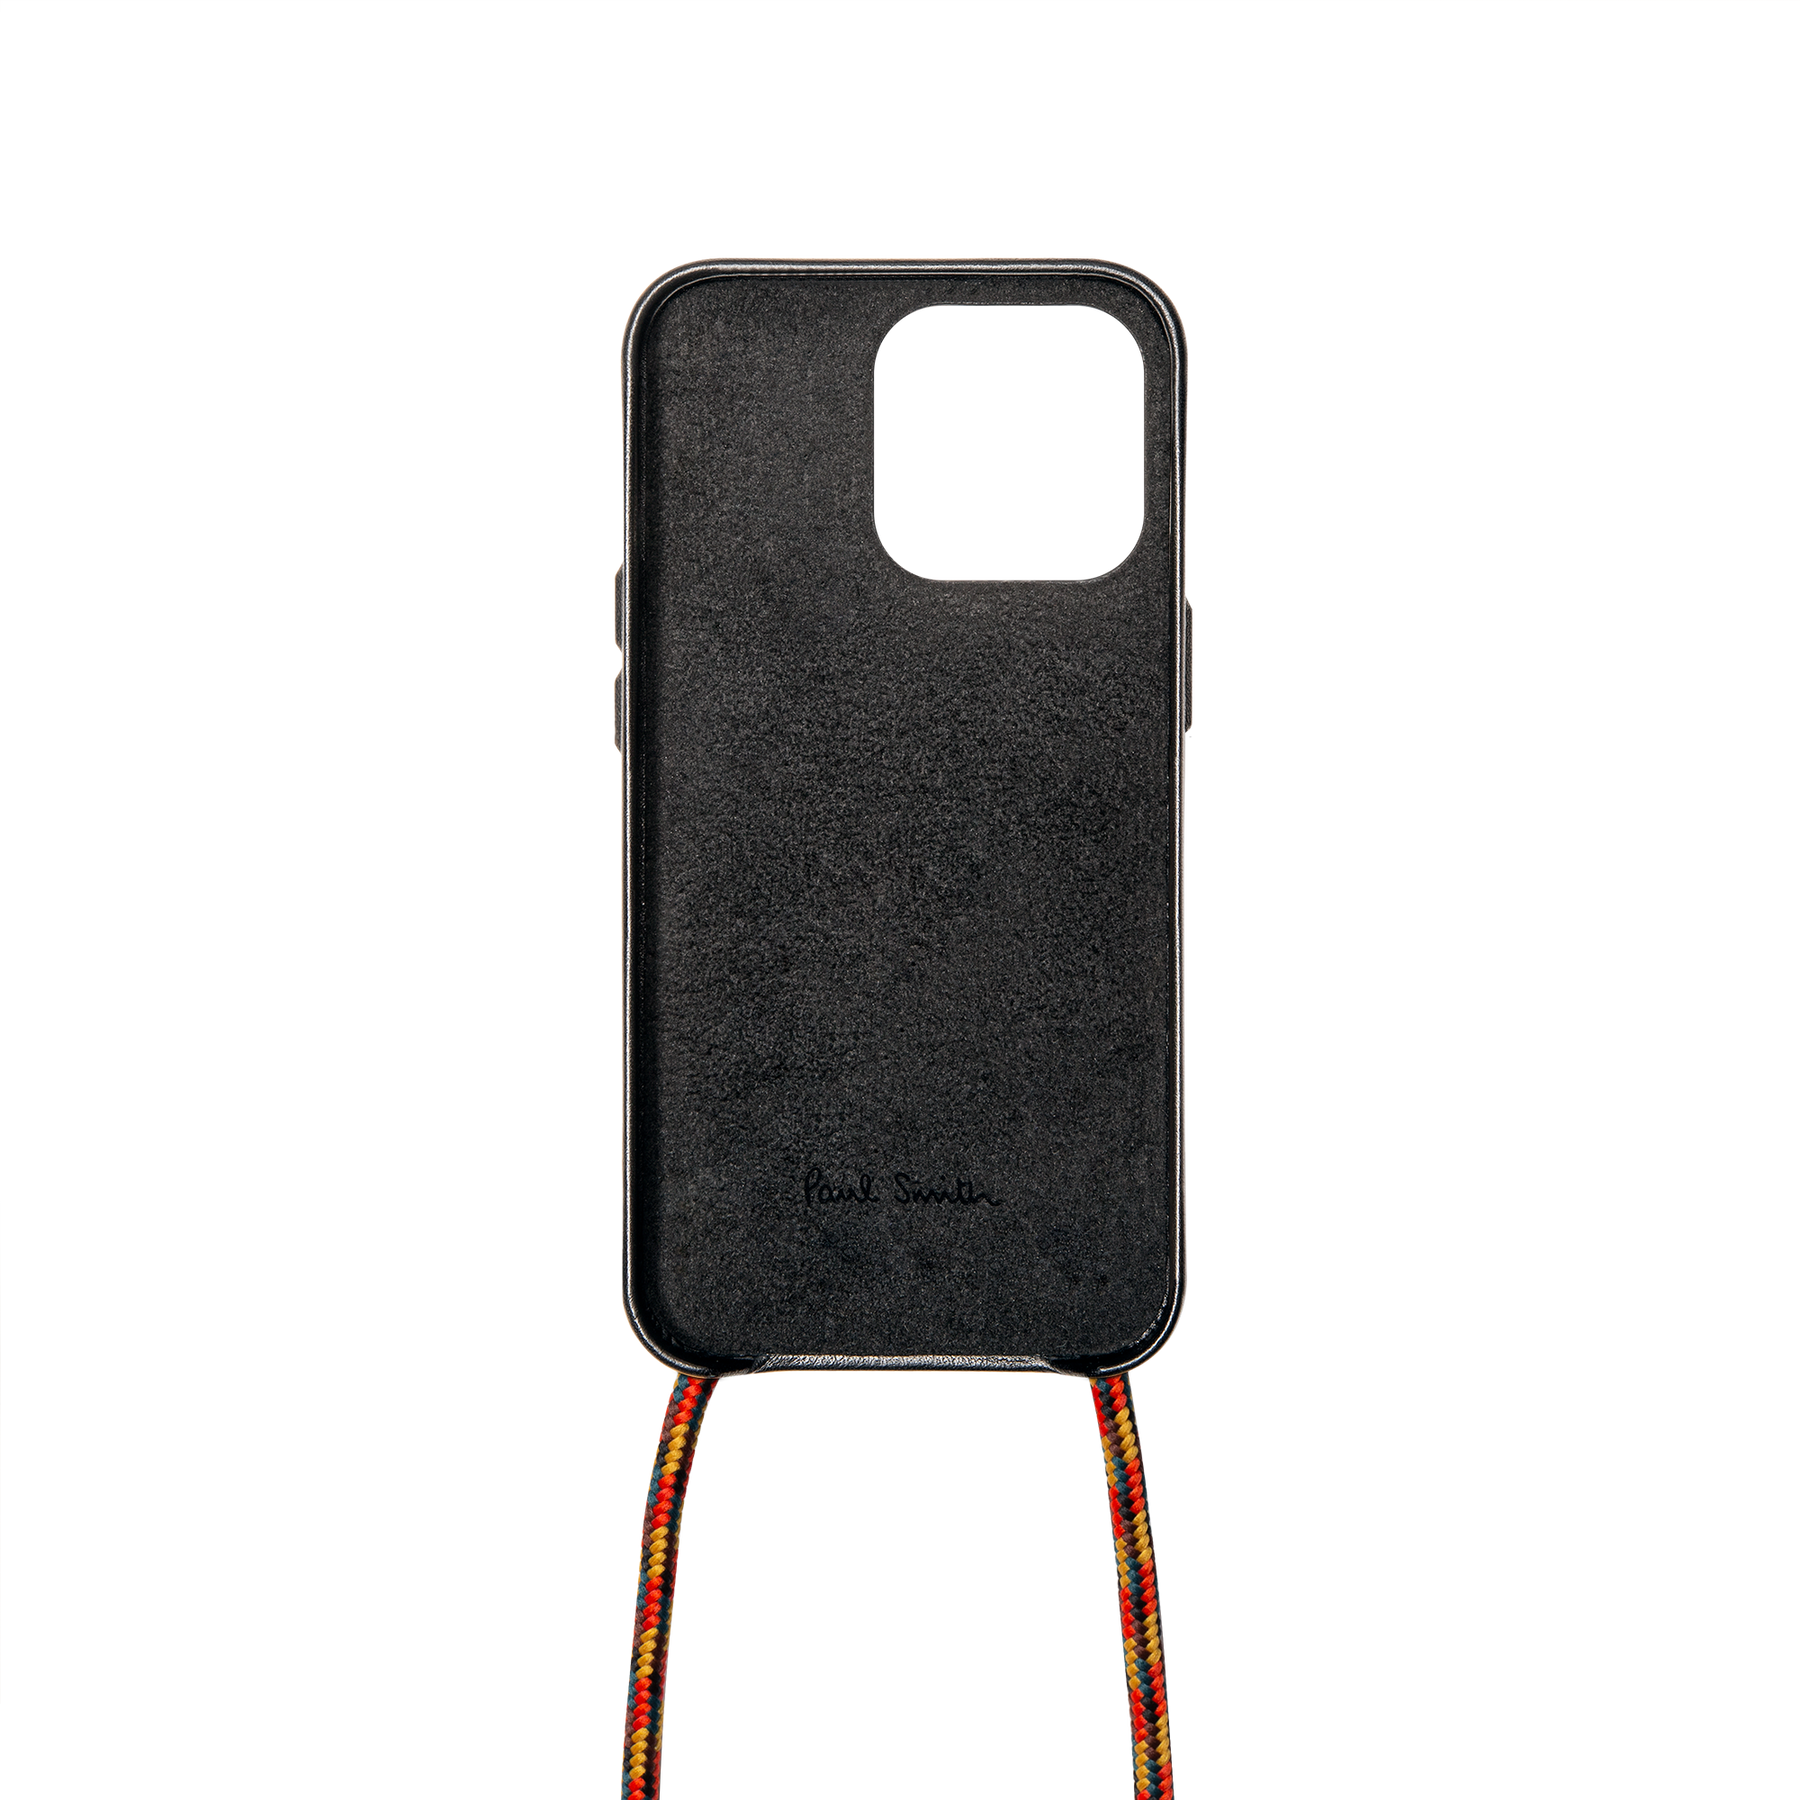 Paul Smith Sling Leather Case (iPhone 13 Pro)